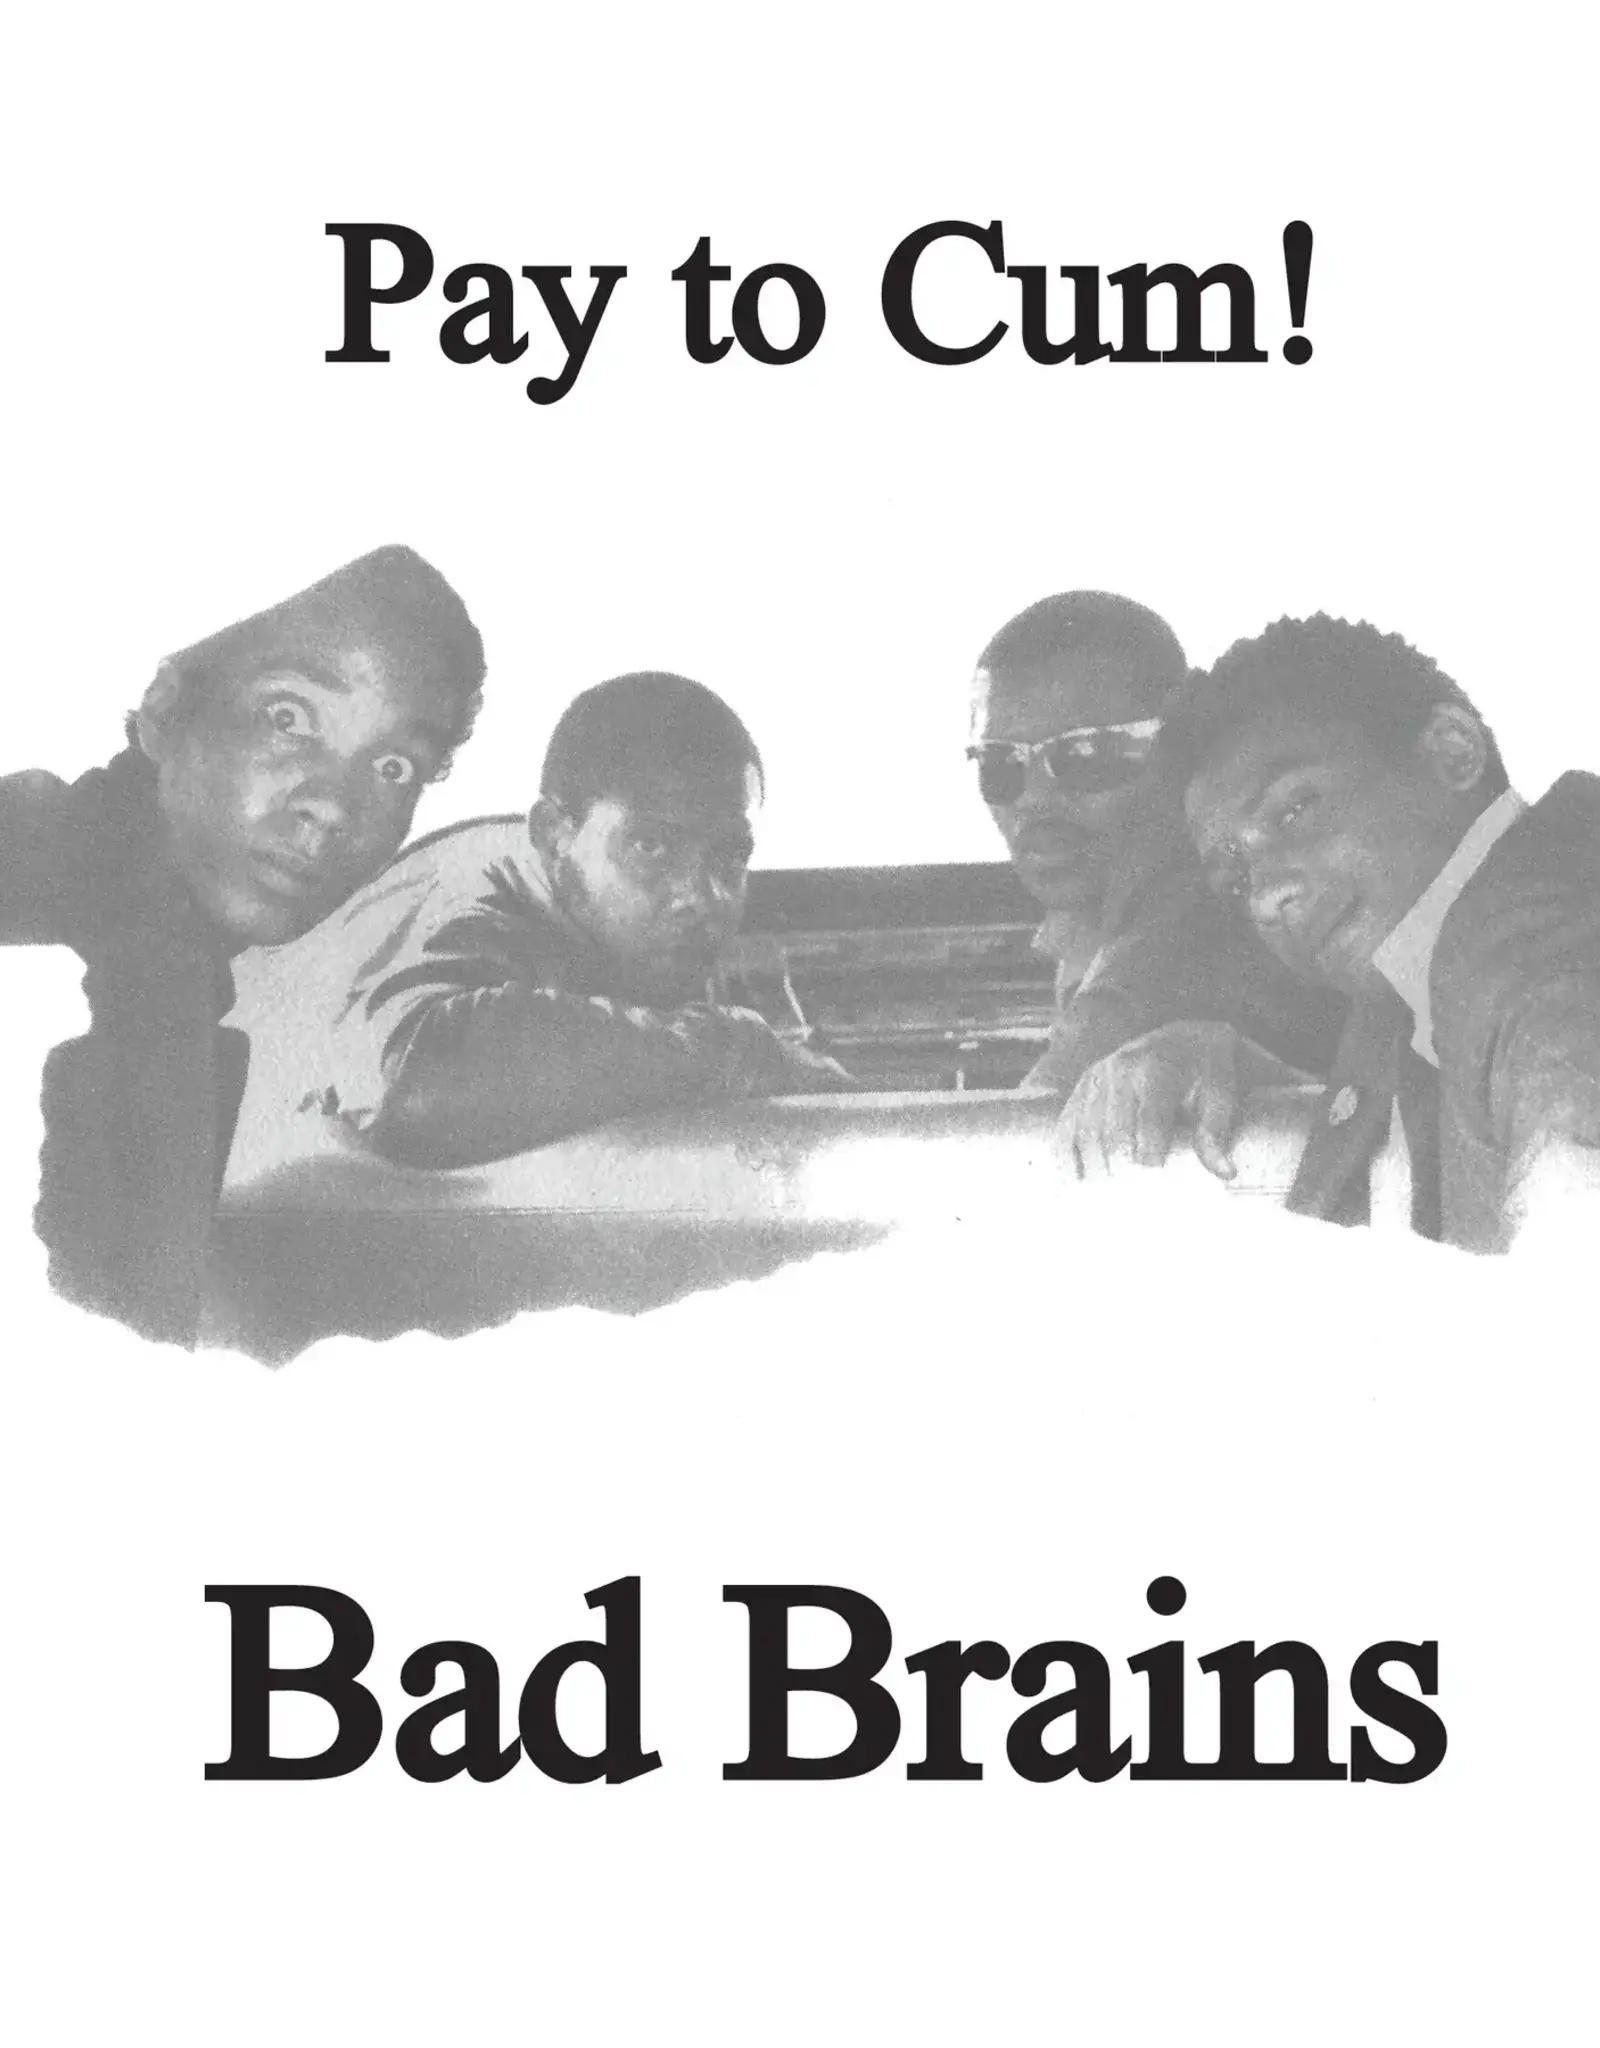 Bad Brains - Pay to Cum 7" (coke bottle green)